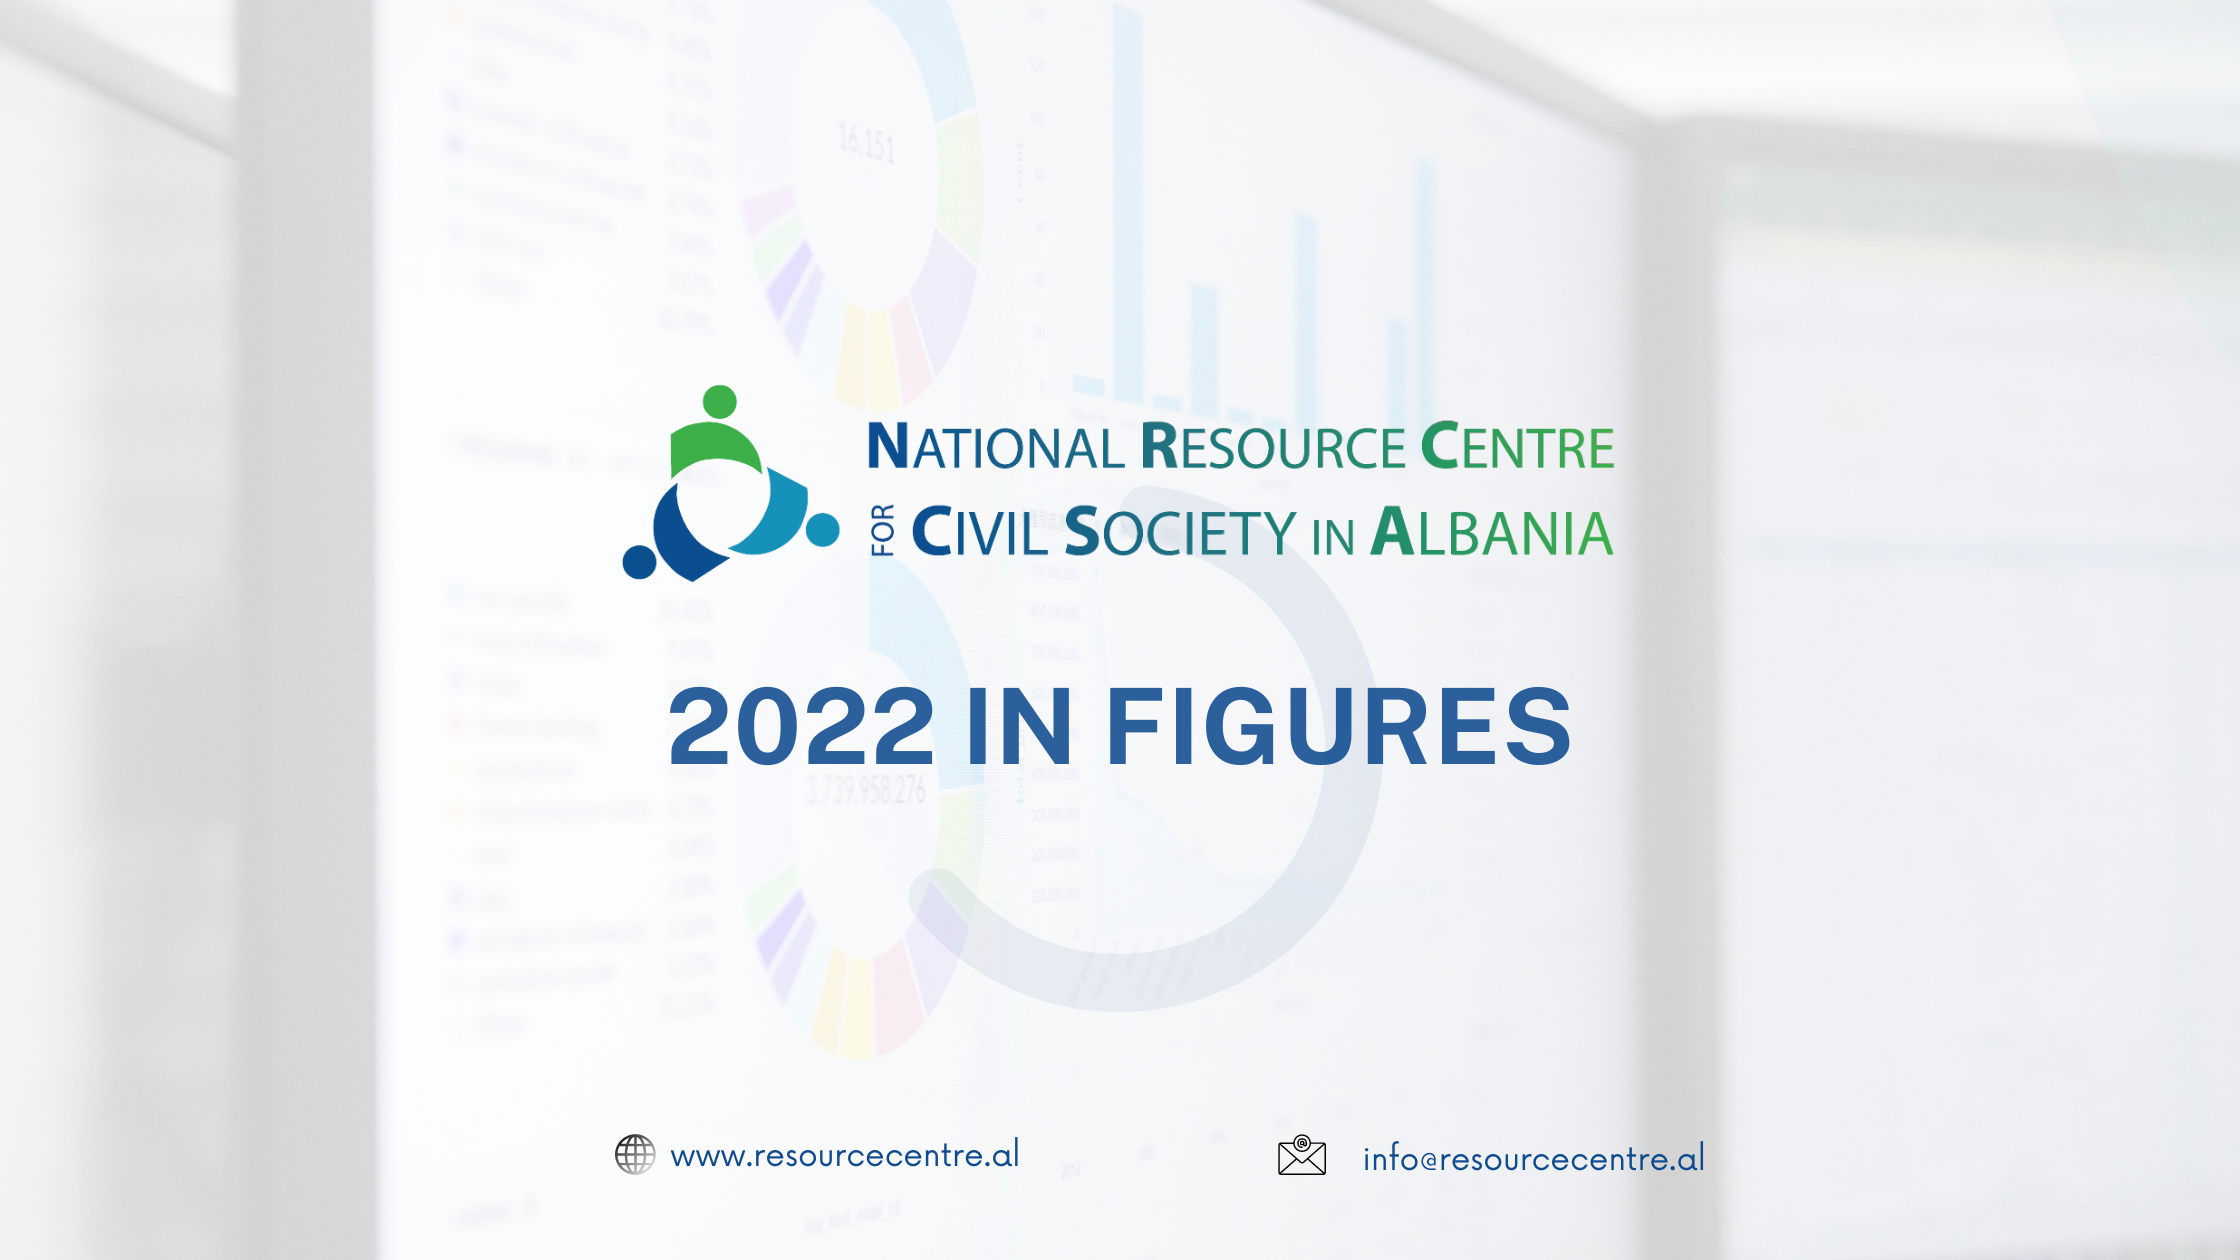 National Resource Center for Civil Society in Albania, throughout 2022!